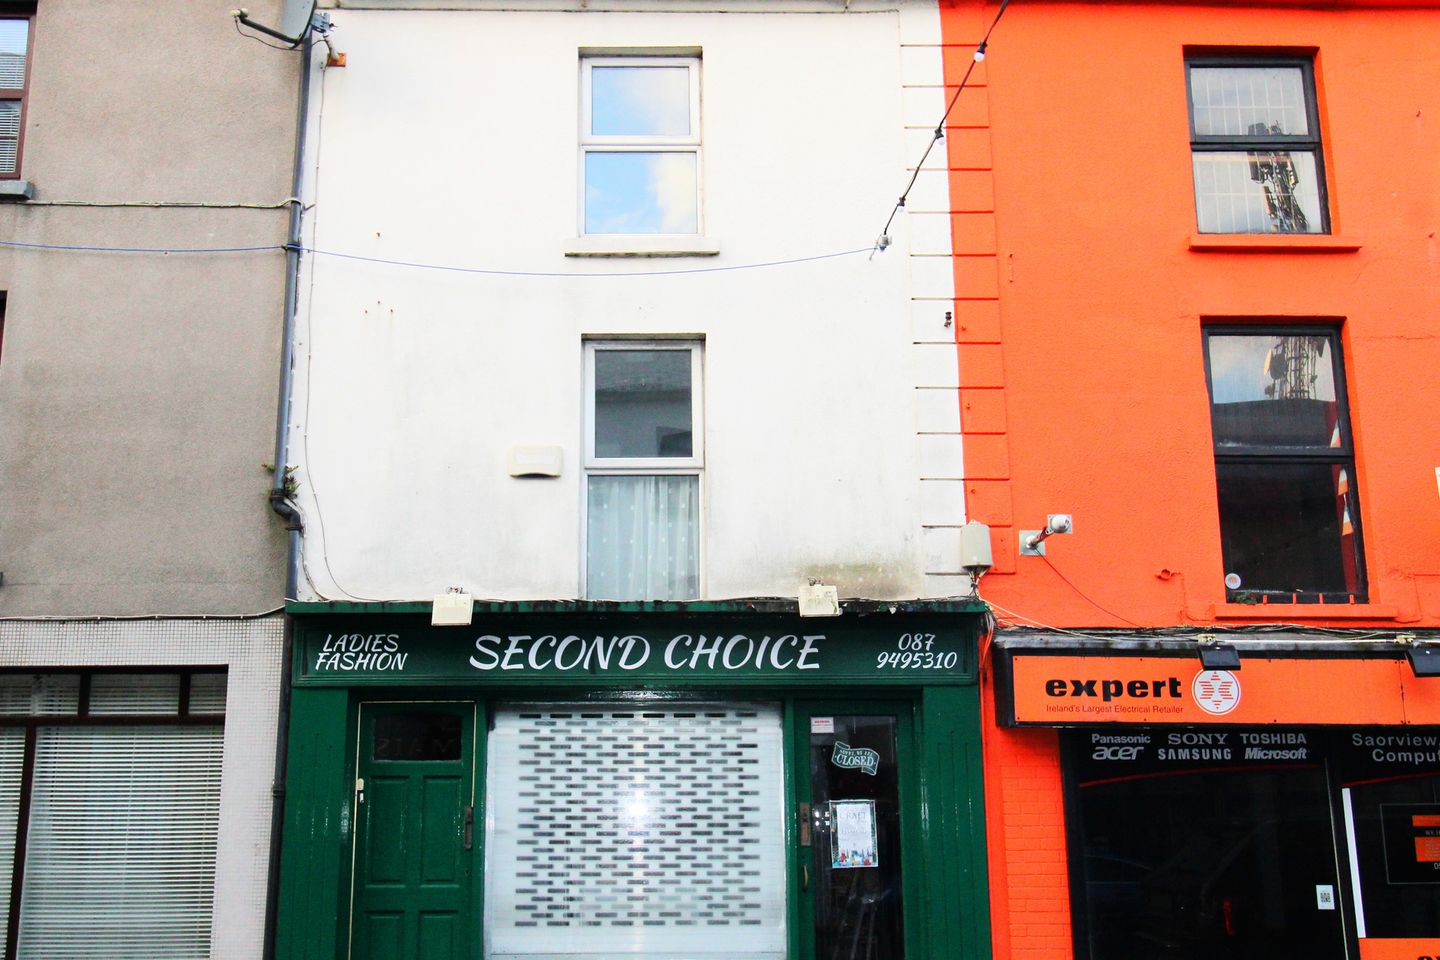 SECOND CHOICE, 11 Saint Mary Street, Dungarvan, Co. Waterford, X35DY77